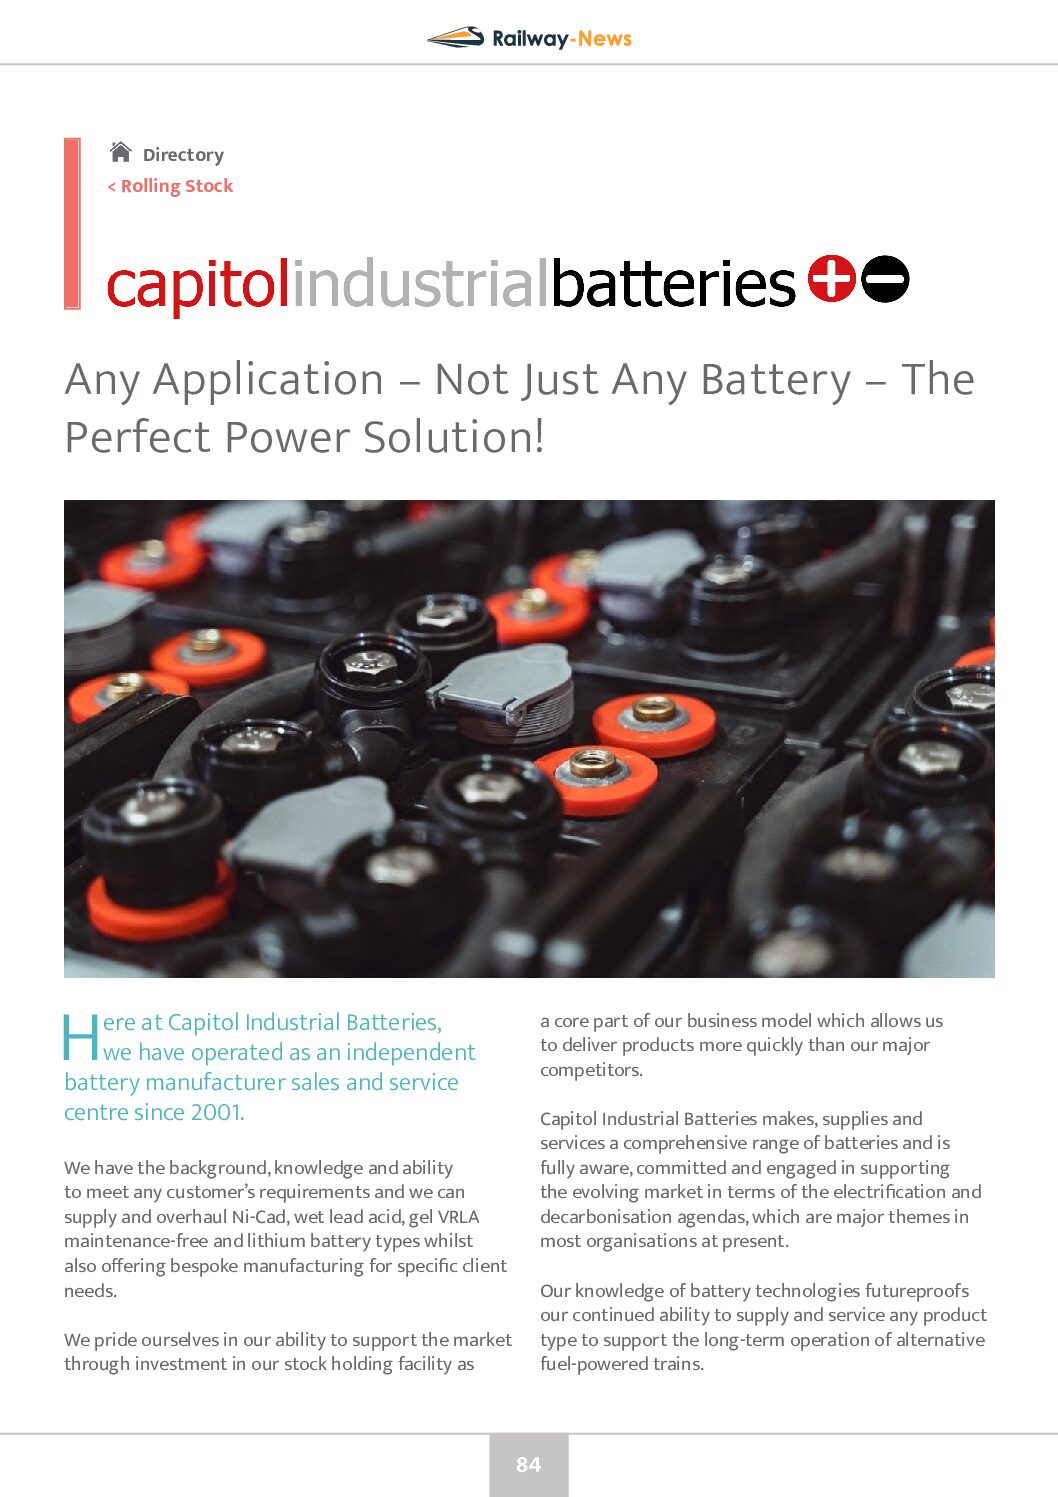 Any Application, Not Just Any Battery – The Perfect Power Solution!